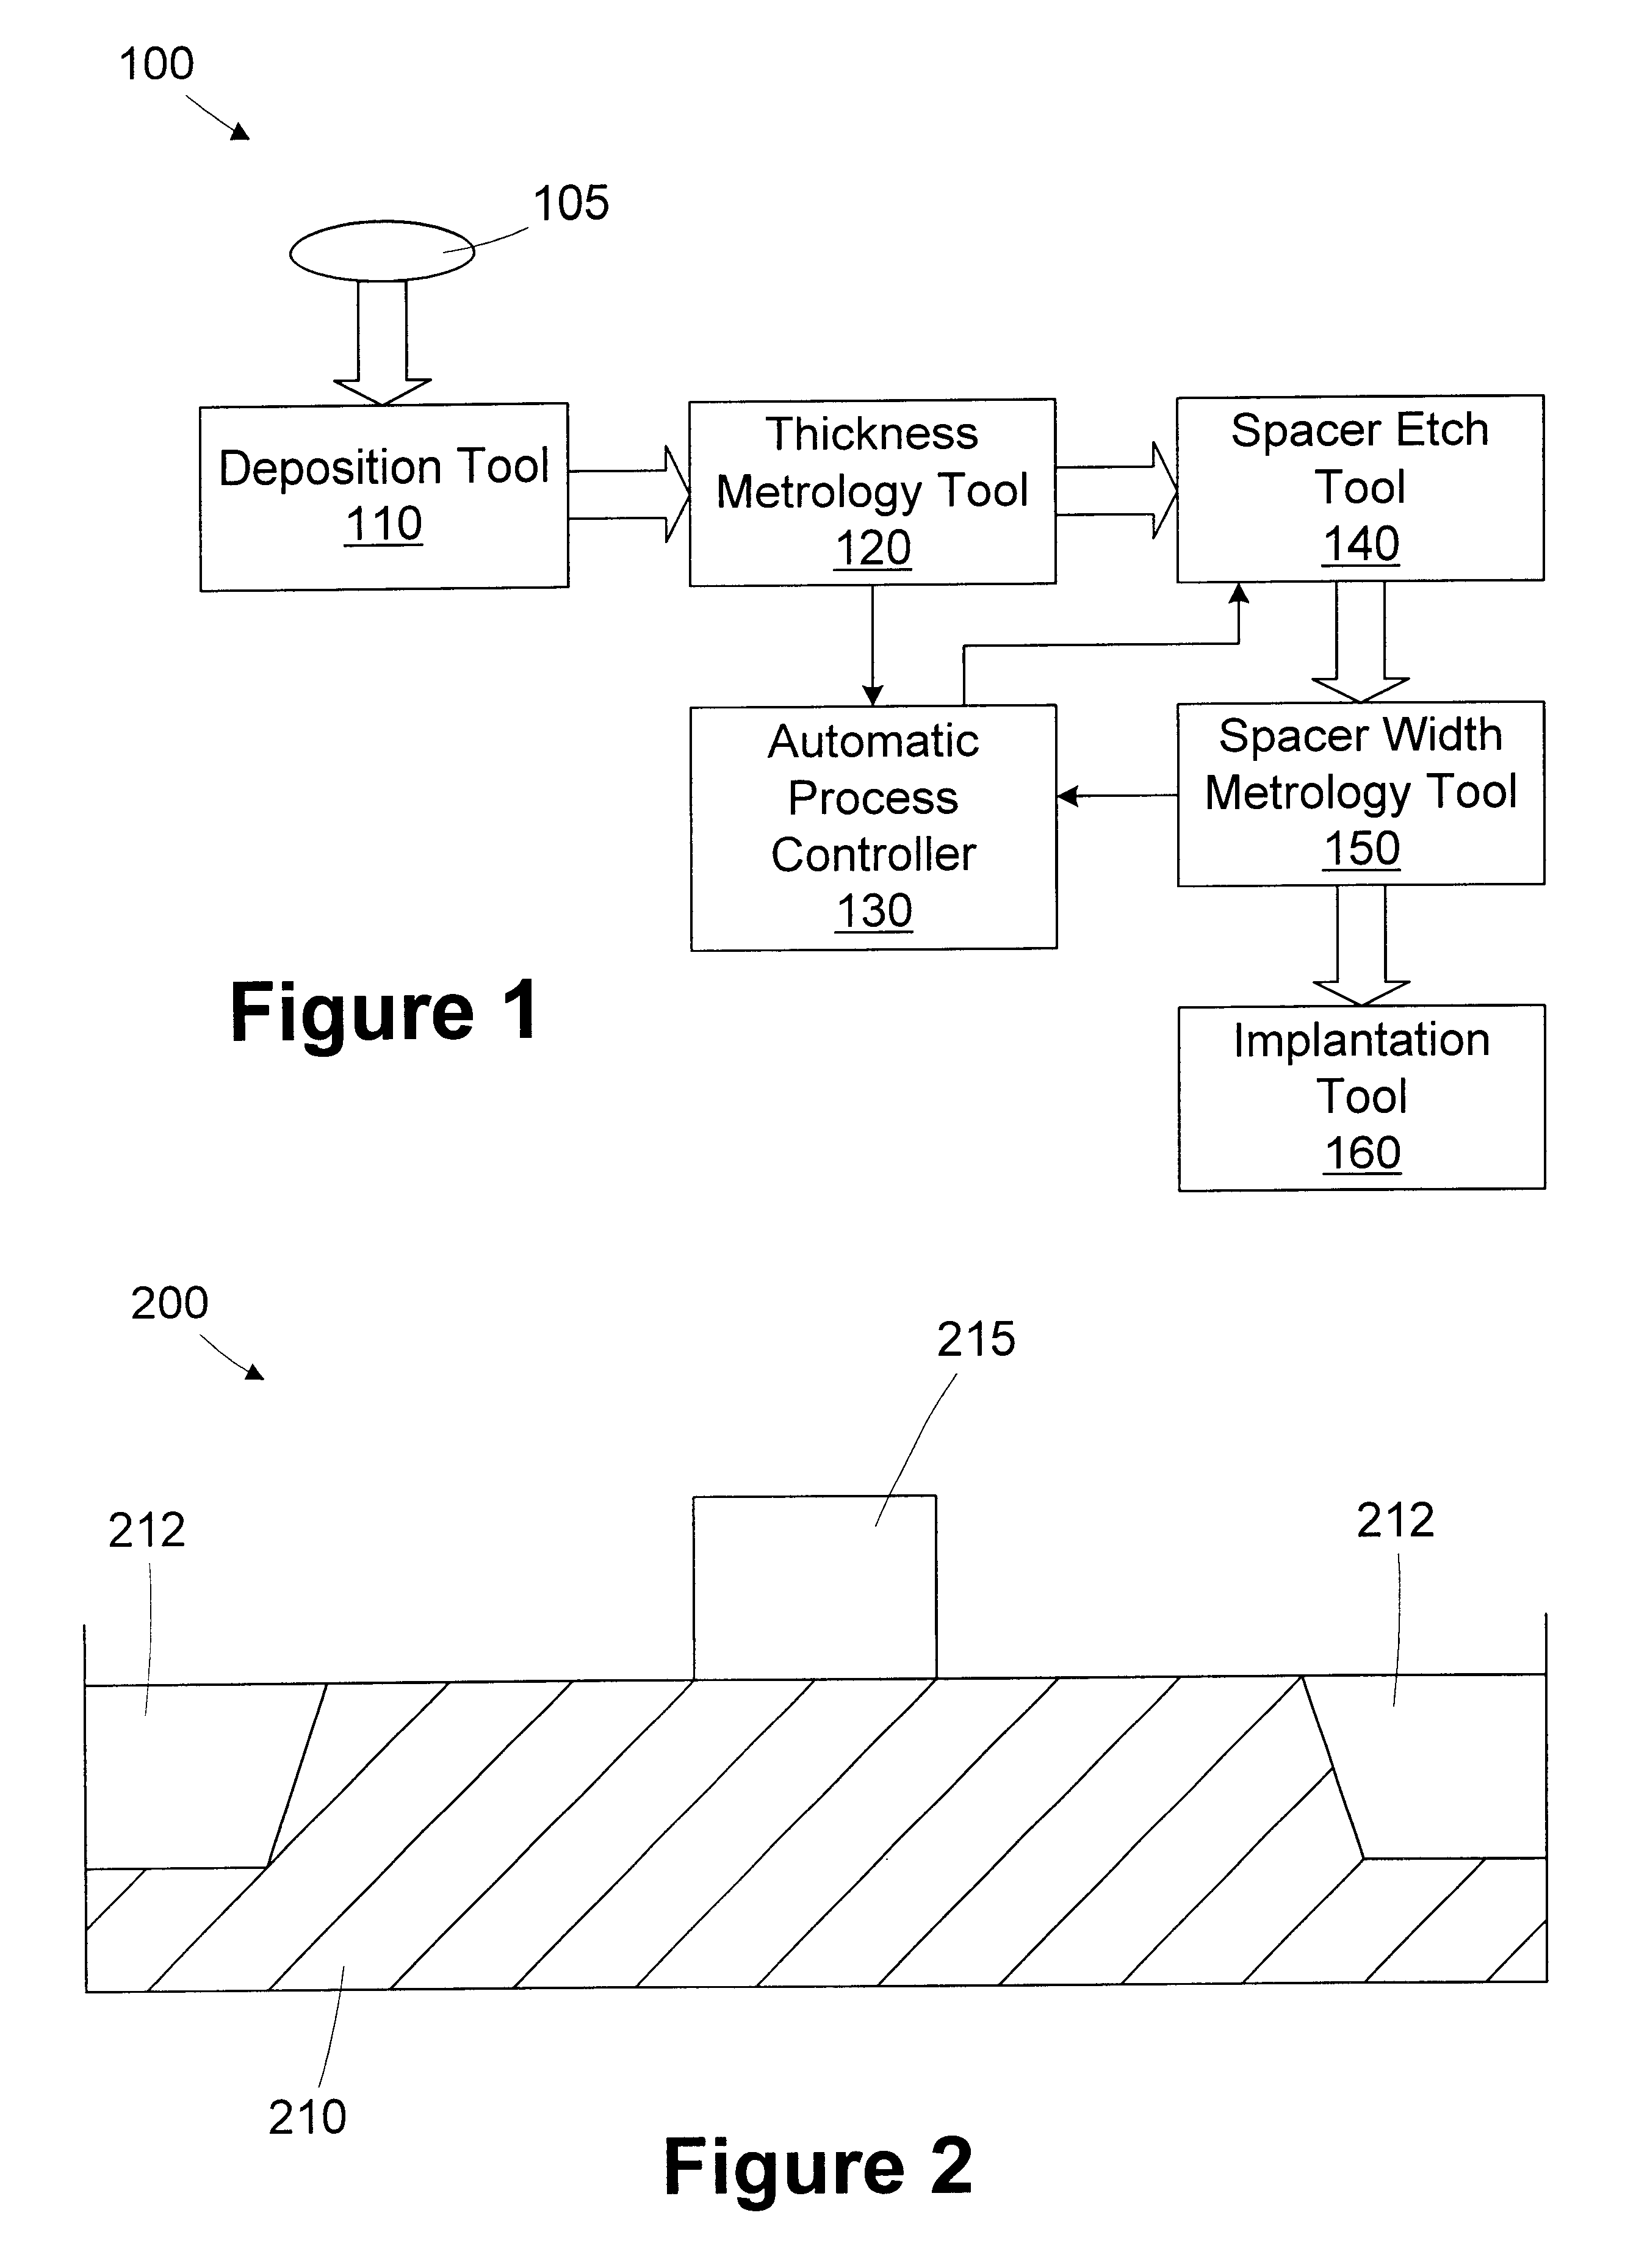 System for controlling transistor spacer width